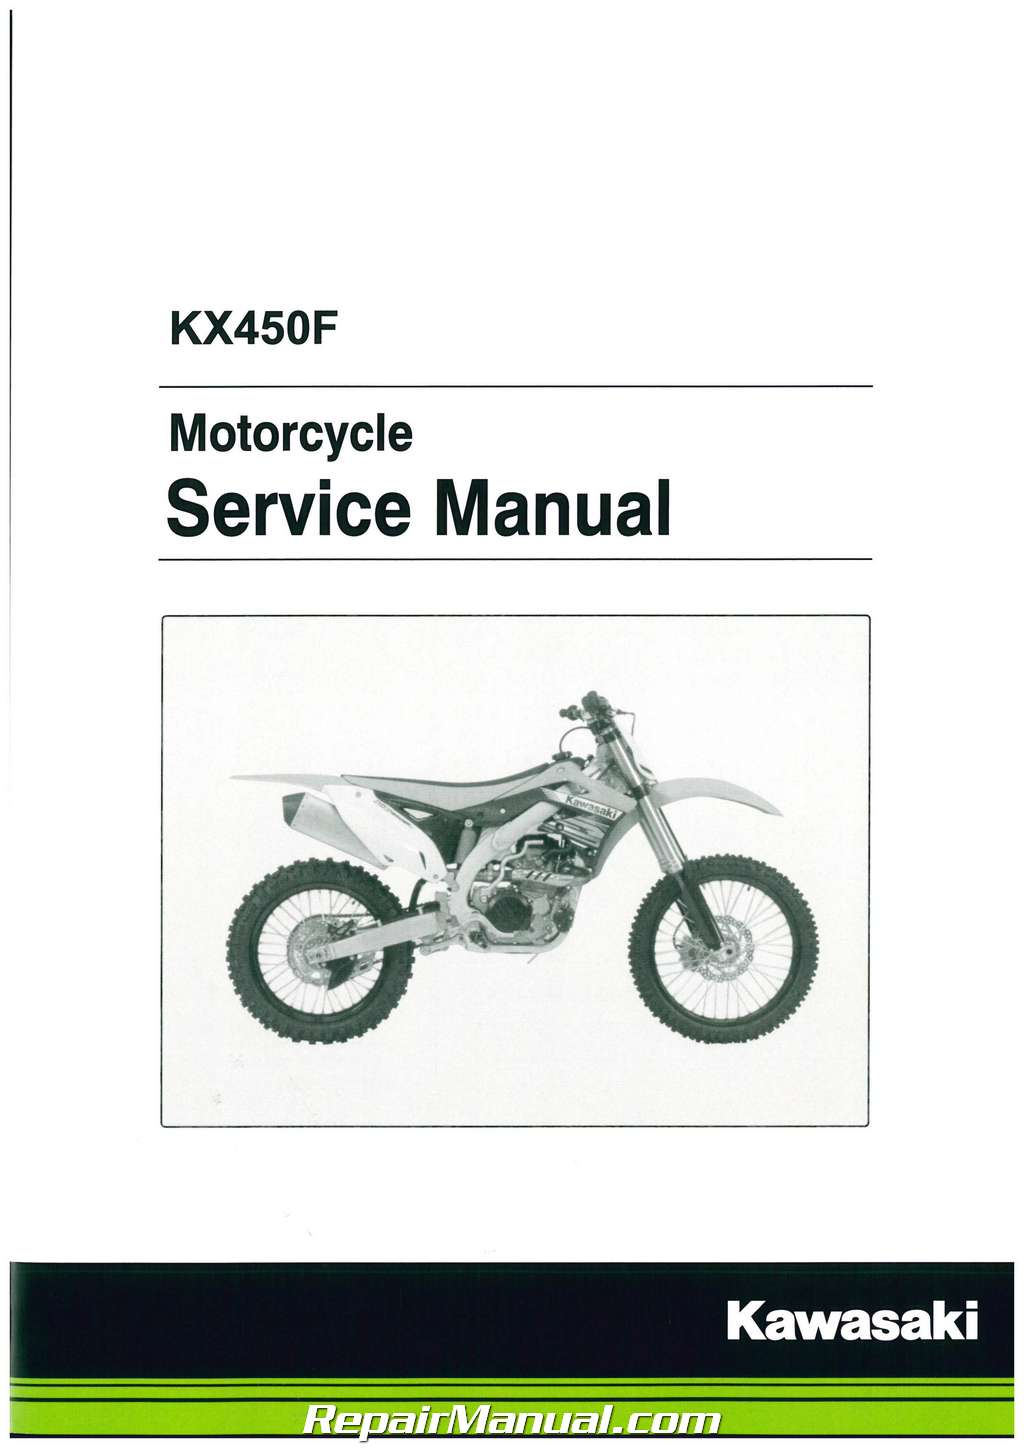 Vaccinere surfing Quilt Kawasaki KX450F 2012 2013 2014 2015 Motorcycle Service Manual